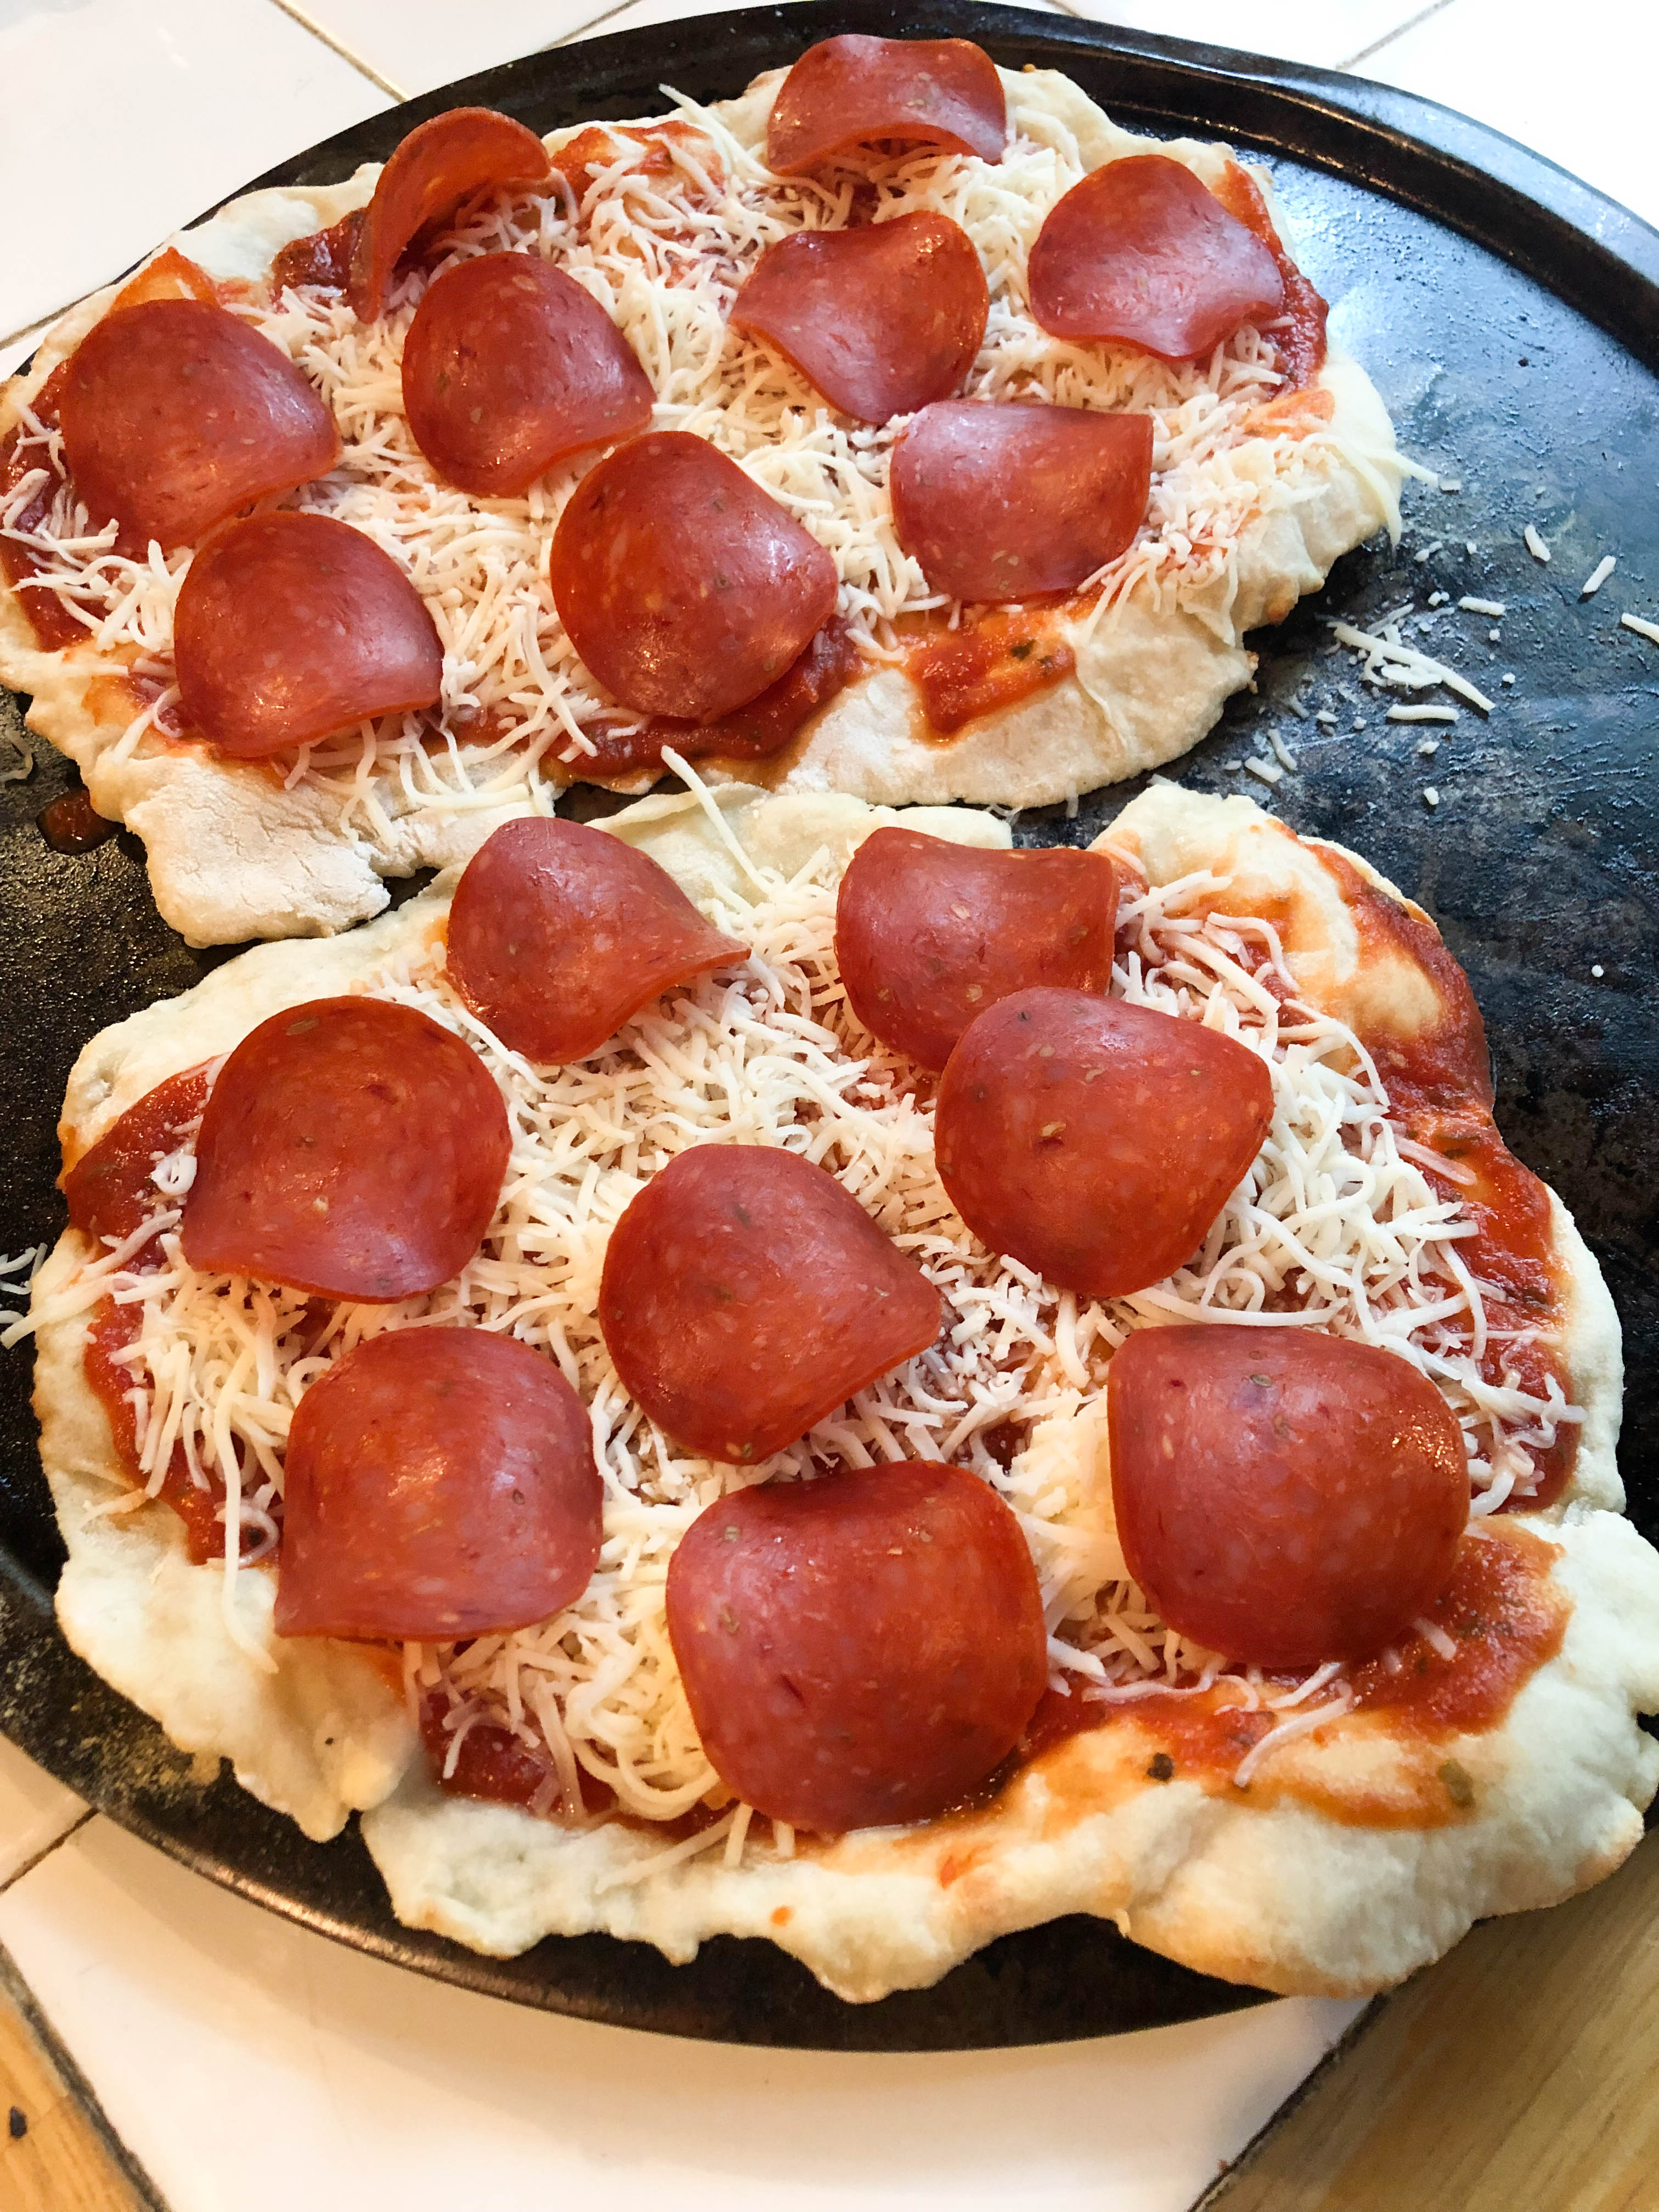 weight watchers pizza with pepperoni